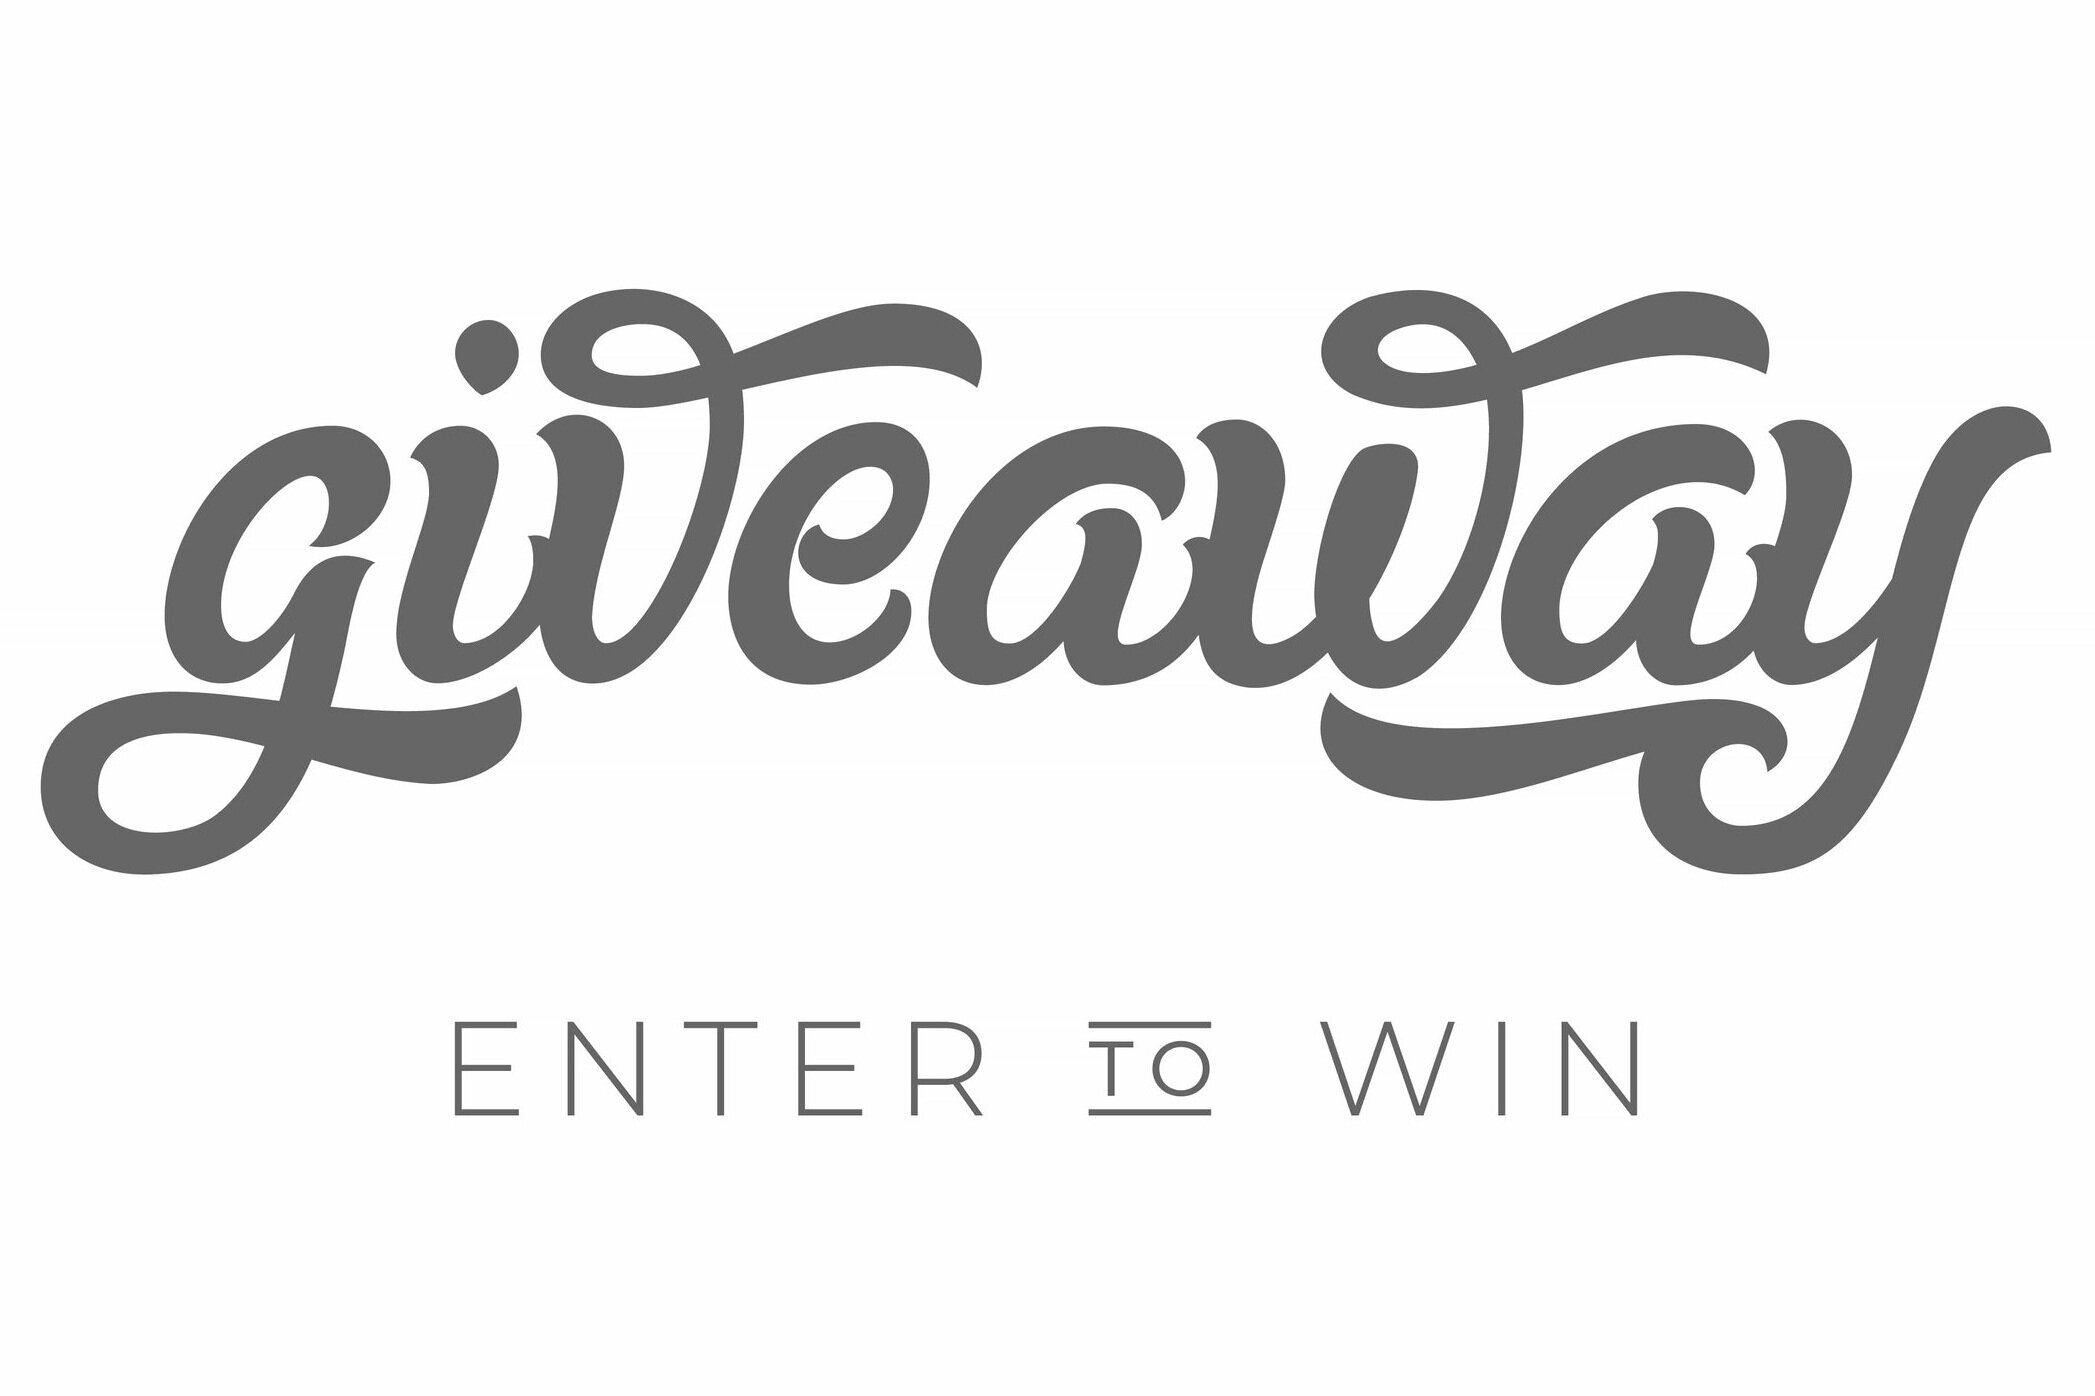 Giveaway App Template